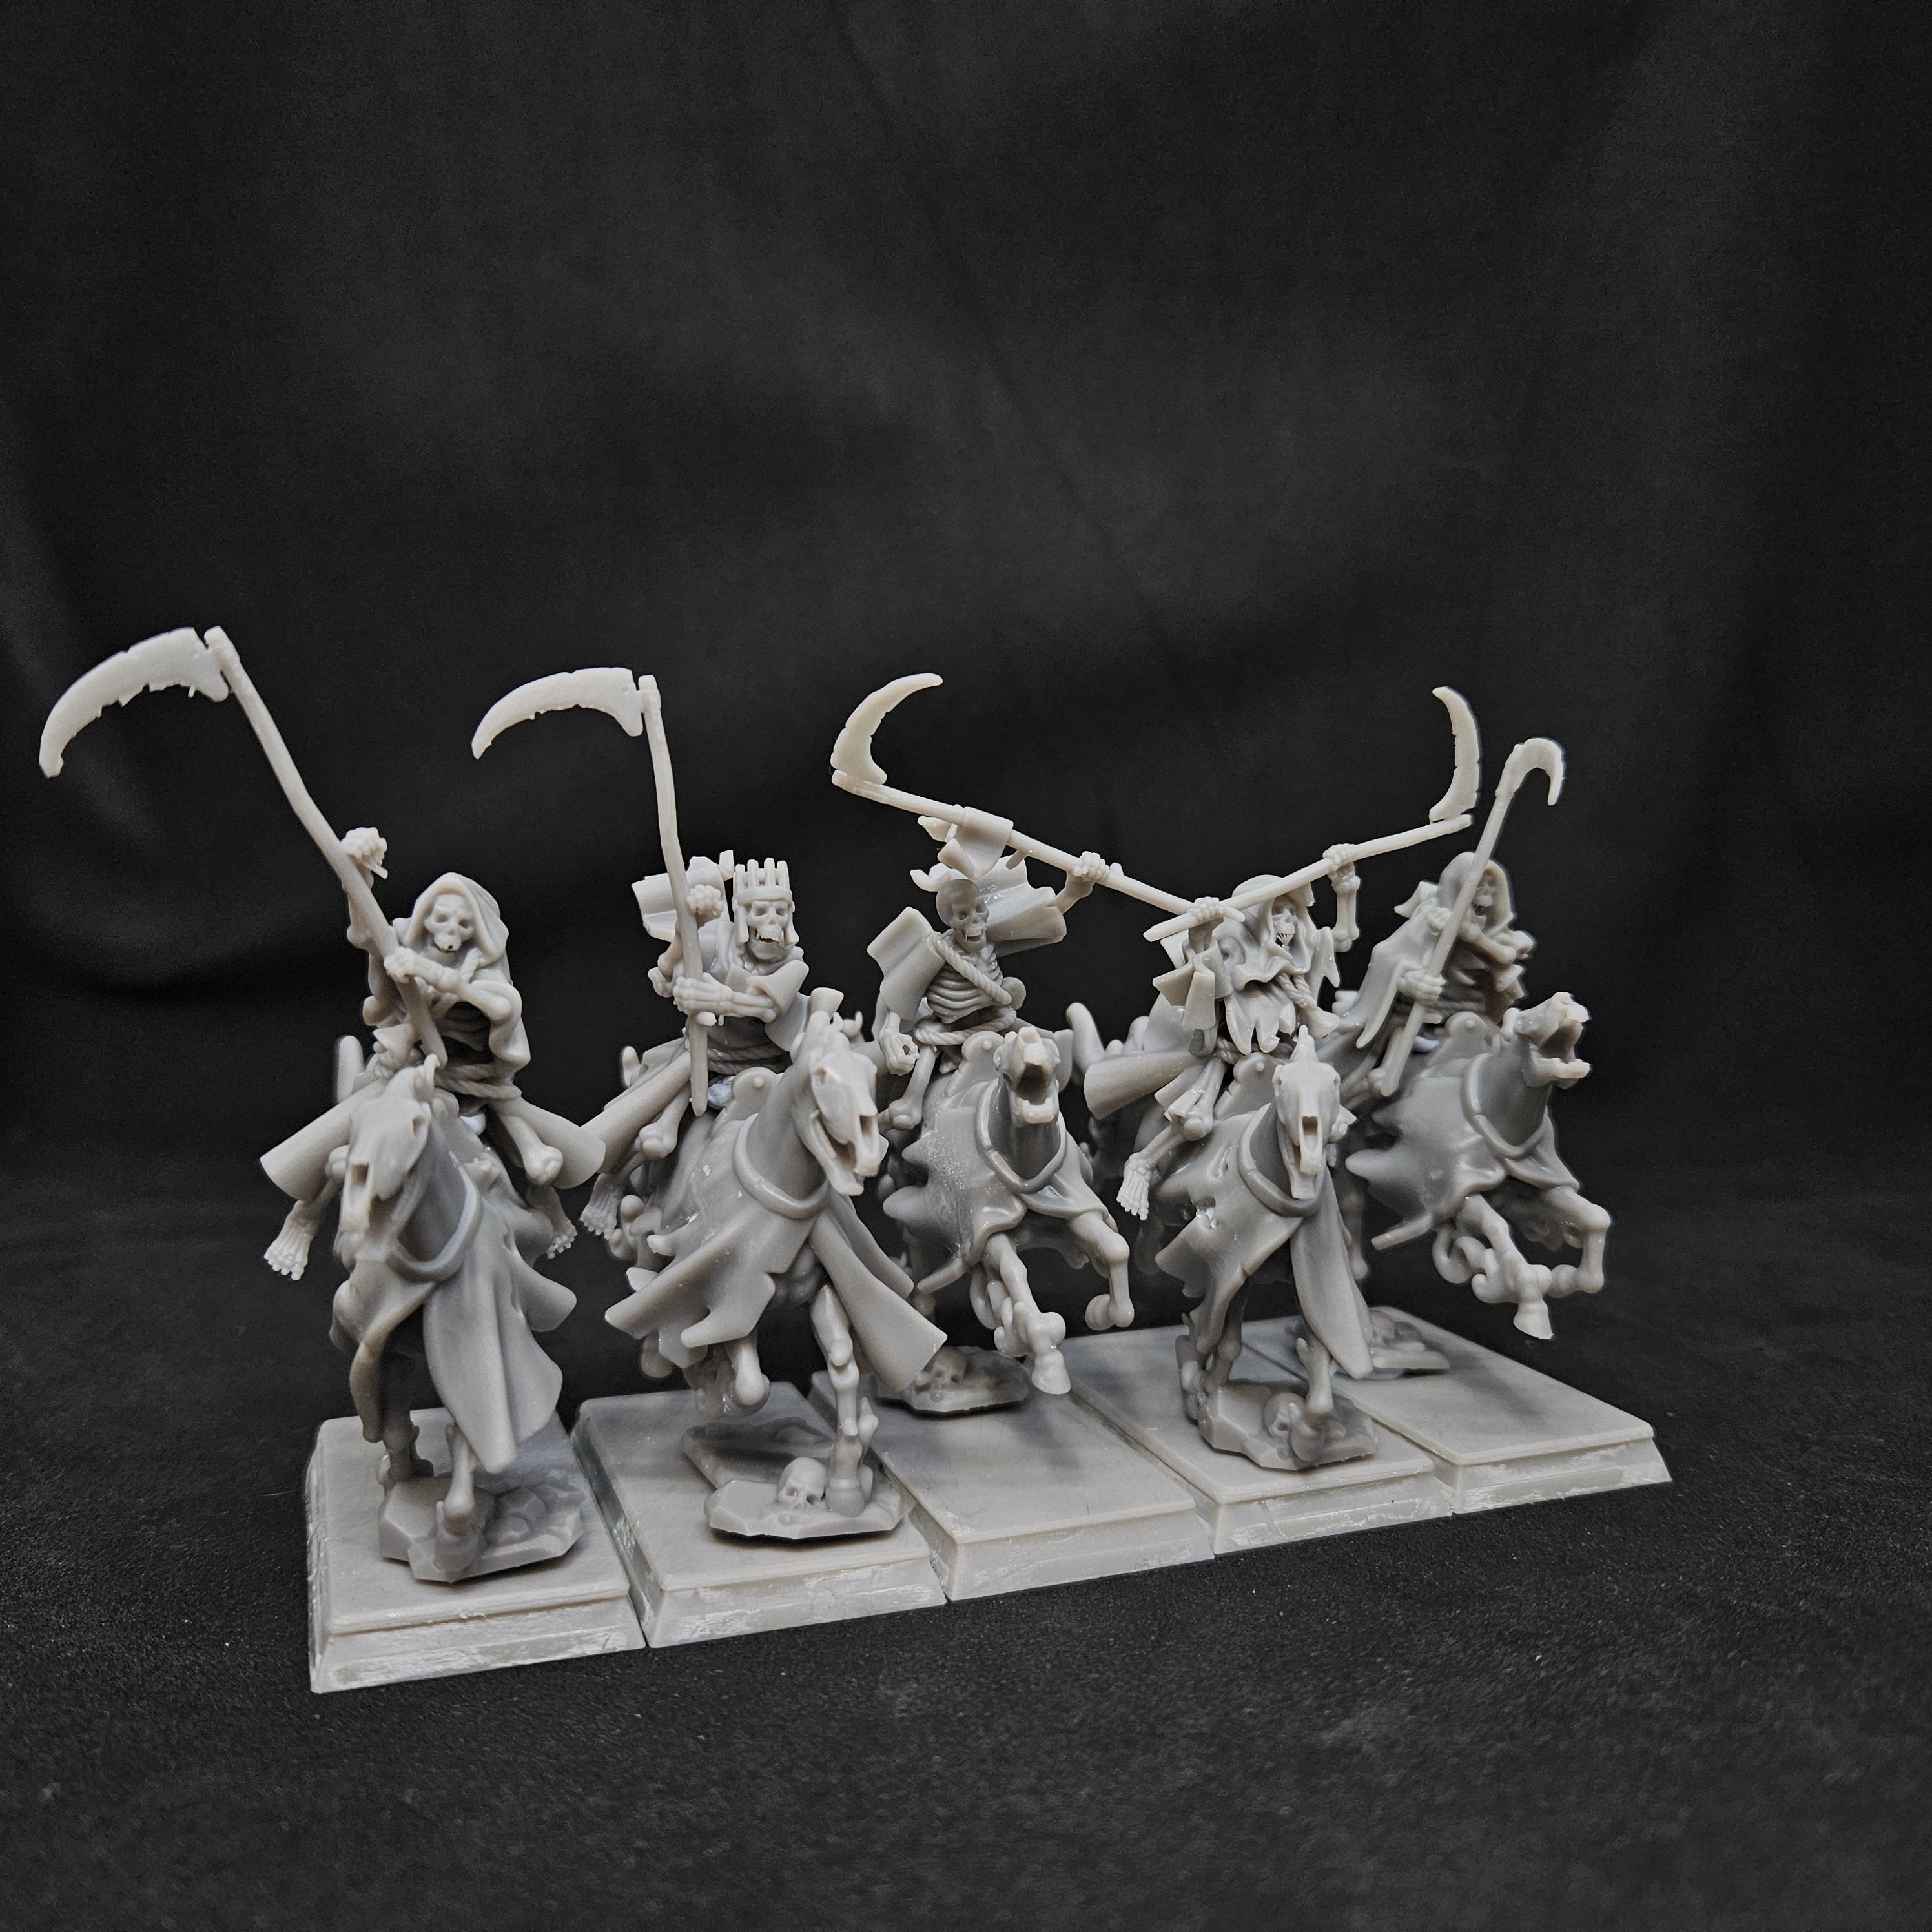 Spectral Cavalry